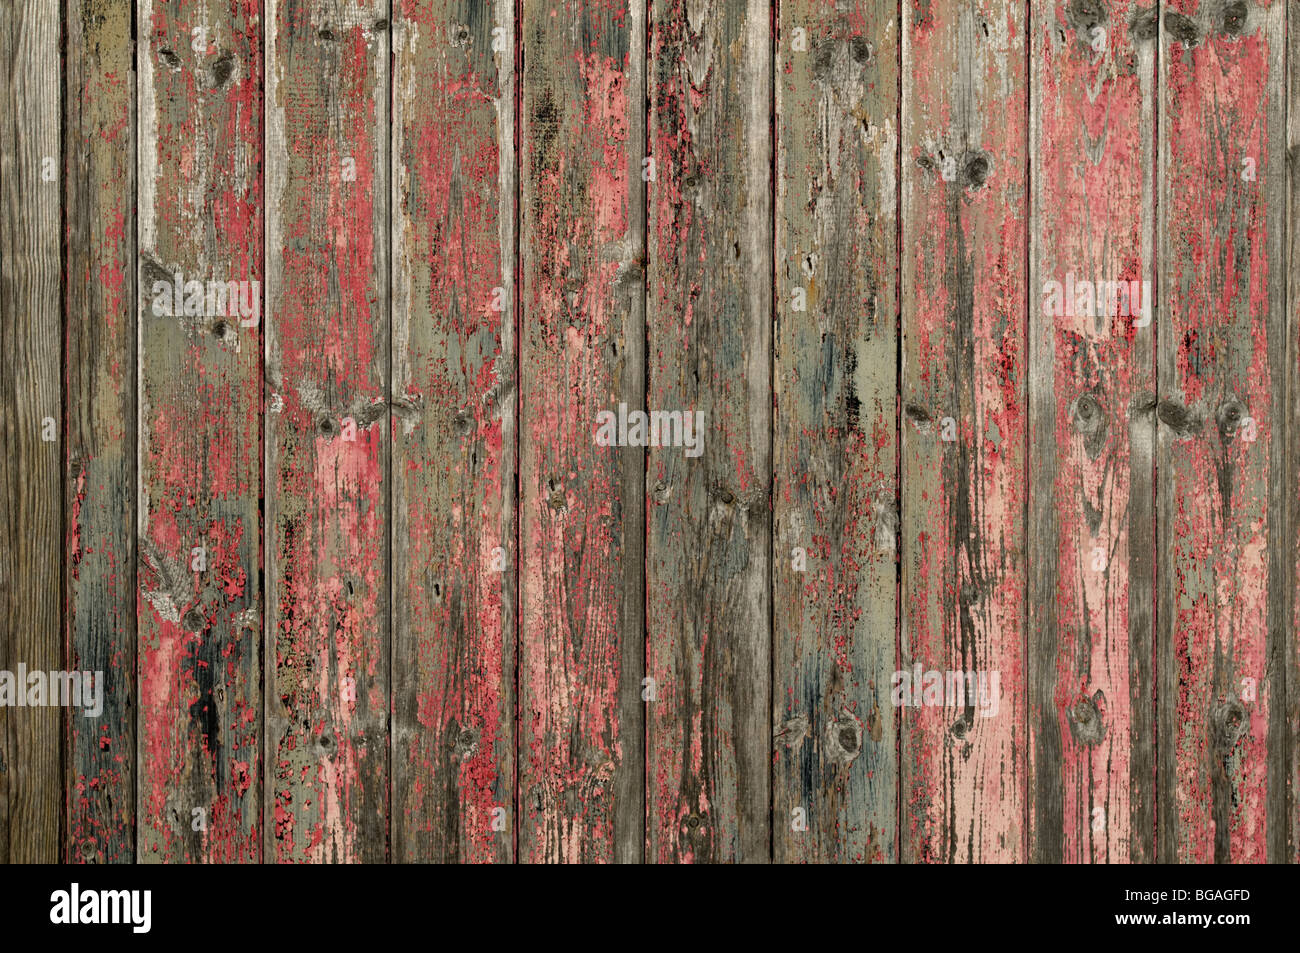 Wooden wall with fading pink paint textured background. Stock Photo